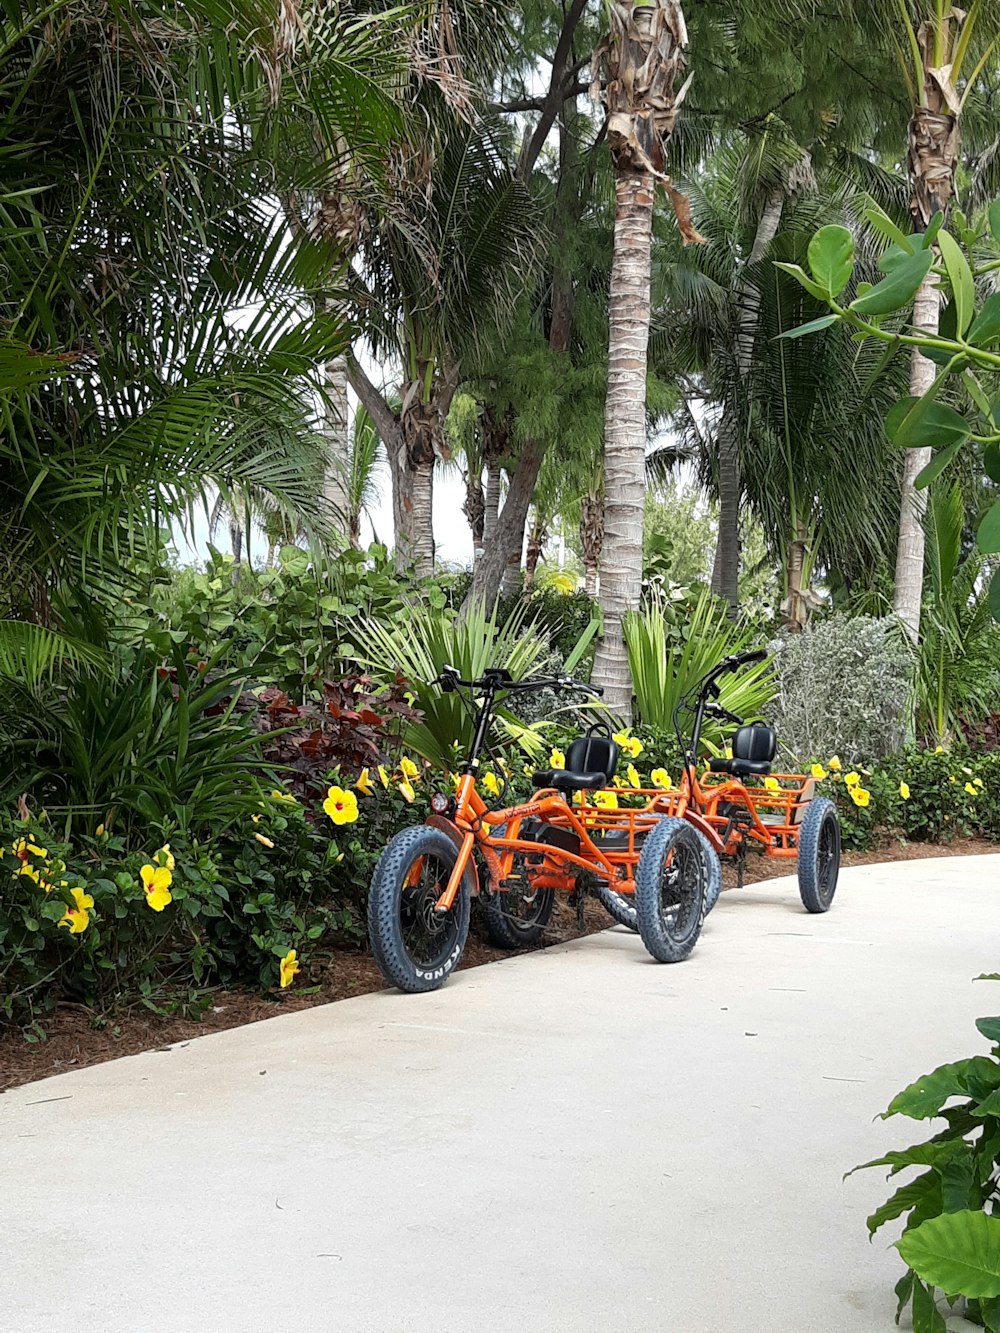 orange and black motorcycle parked near palm trees during daytime